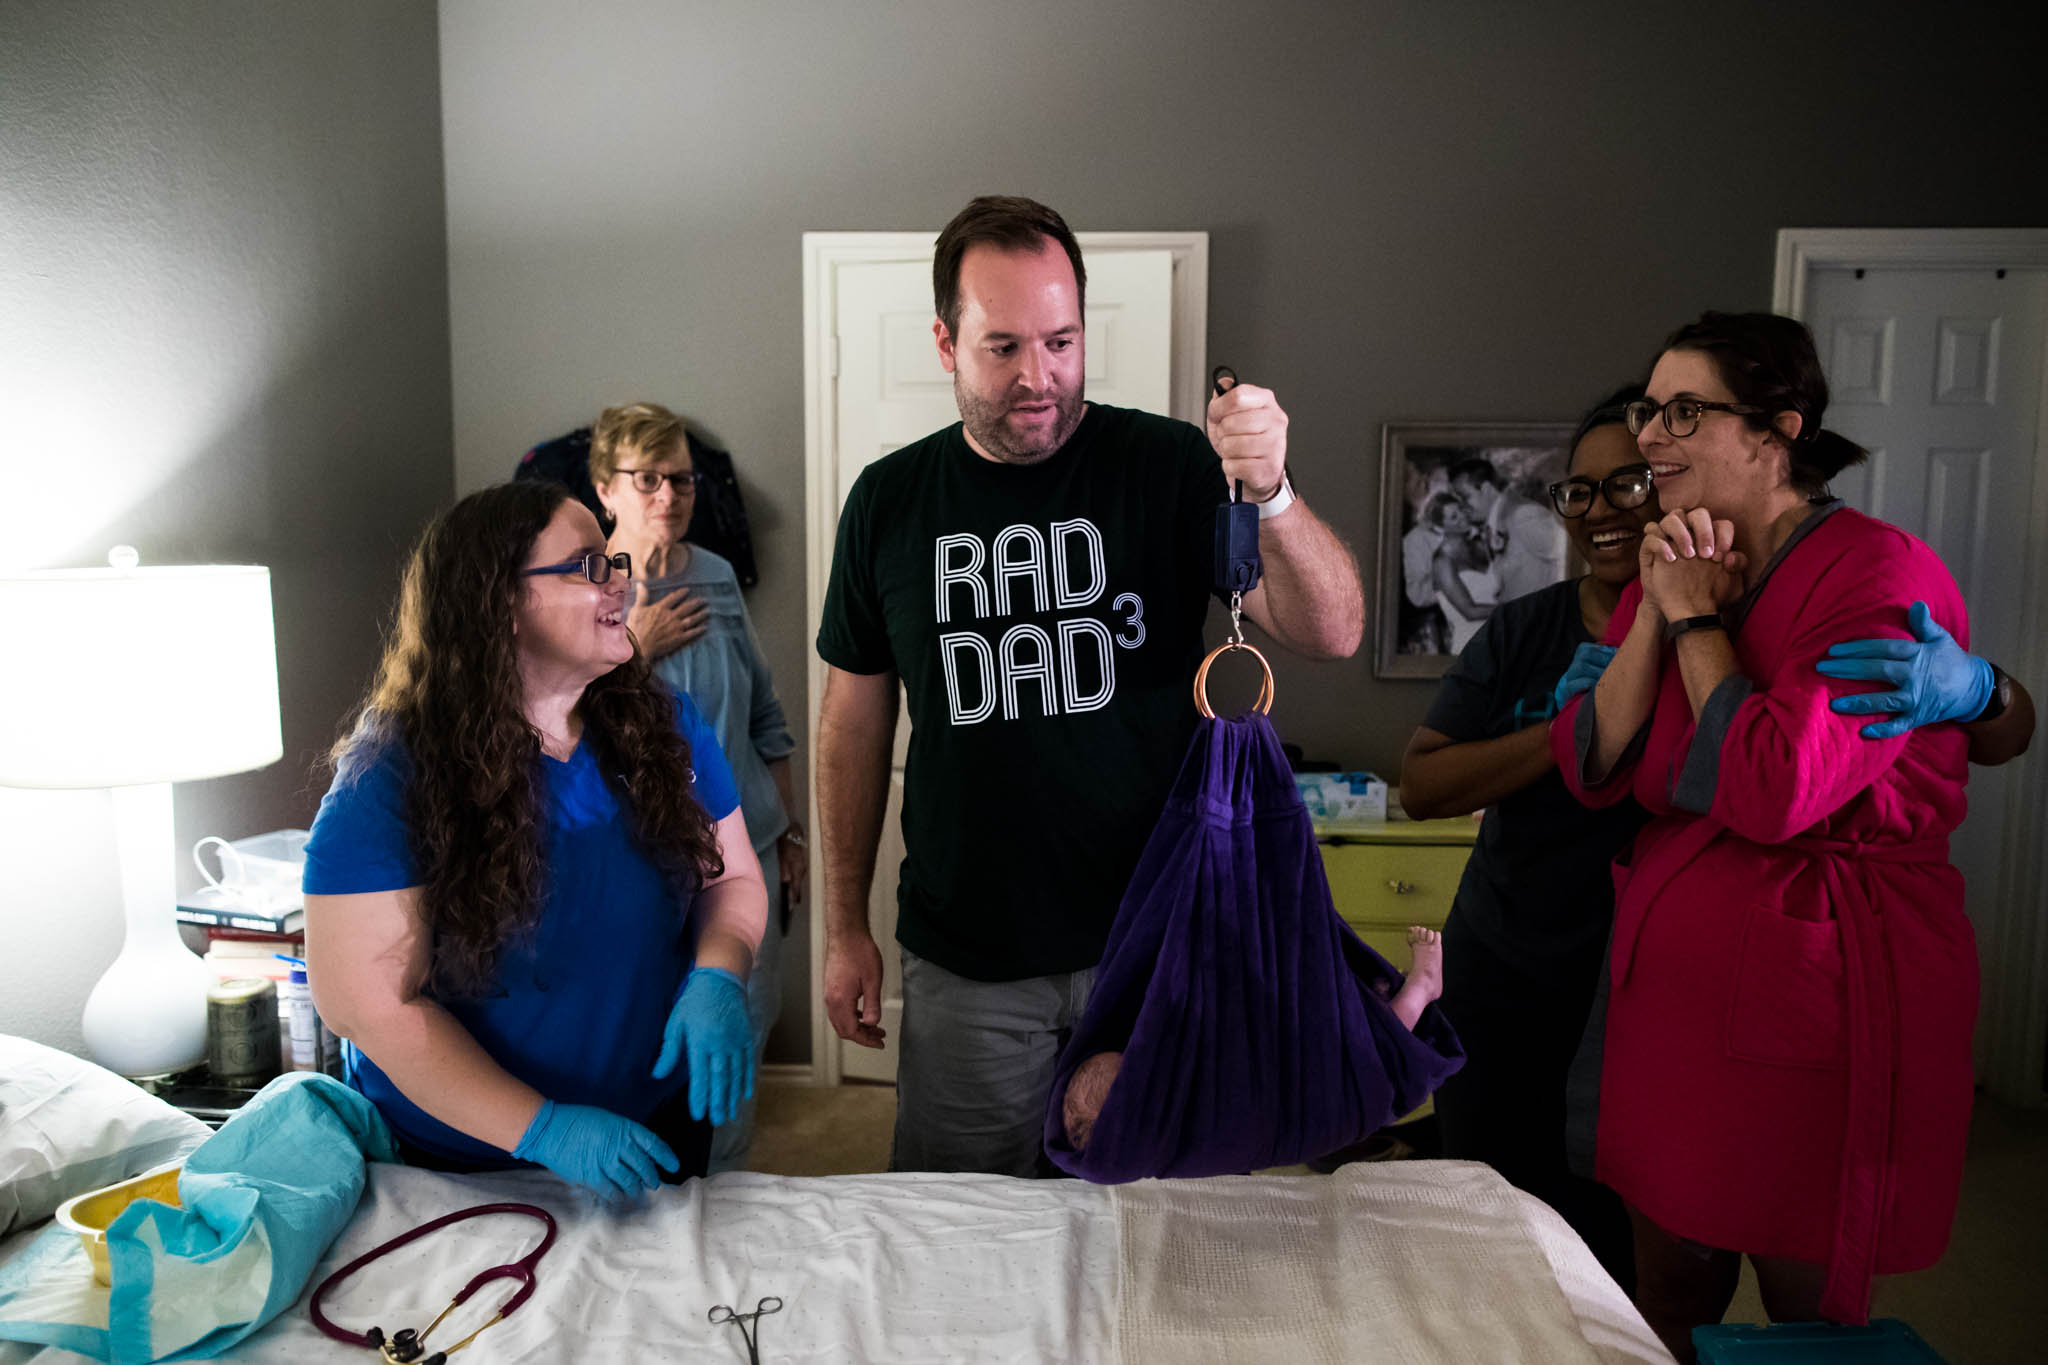 Dallas Birth Photographer Lawren Rose Photography takes an image of the birth team and family surrounding the new Dad holding up the handheld scale to weigh his new baby right after their successful home birth